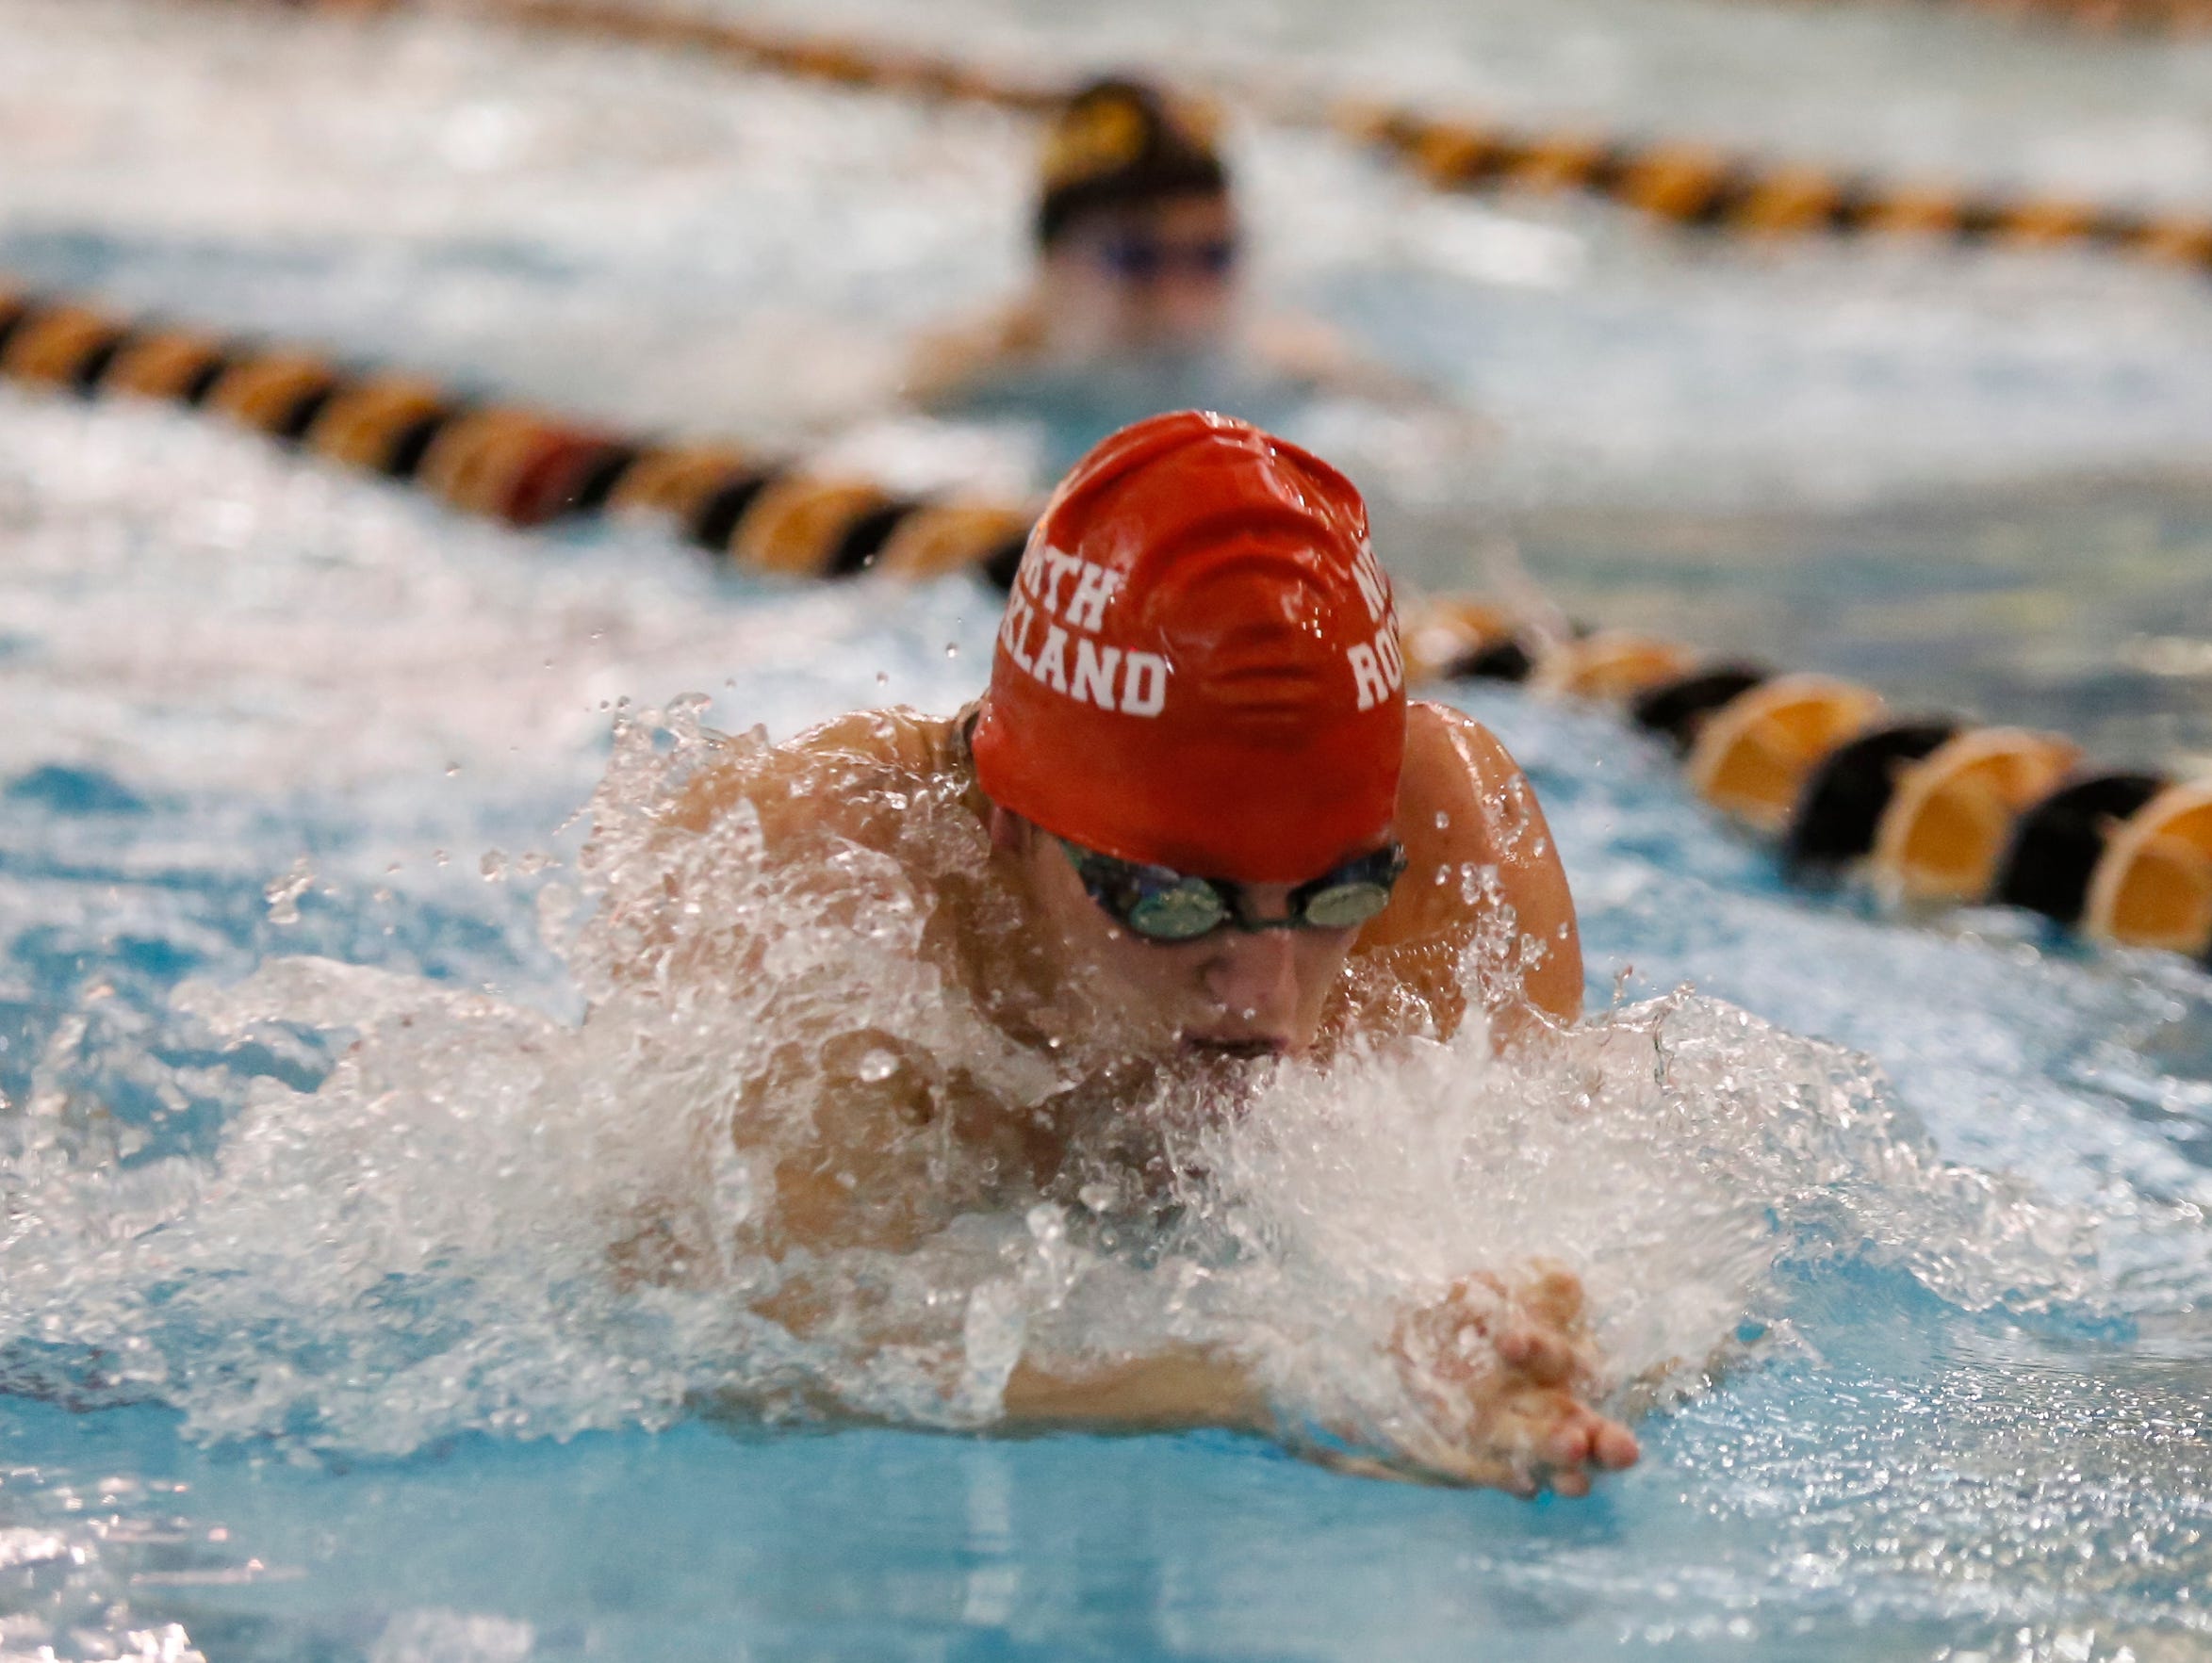 North Rockland's Matthew Zugibe swims the 100-yard butterfly to a 57.42 first place time in the Section 1 boys swimming finals at Felix Festa Middle School in West Nyack on Thursday, Feb. 11, 2016.